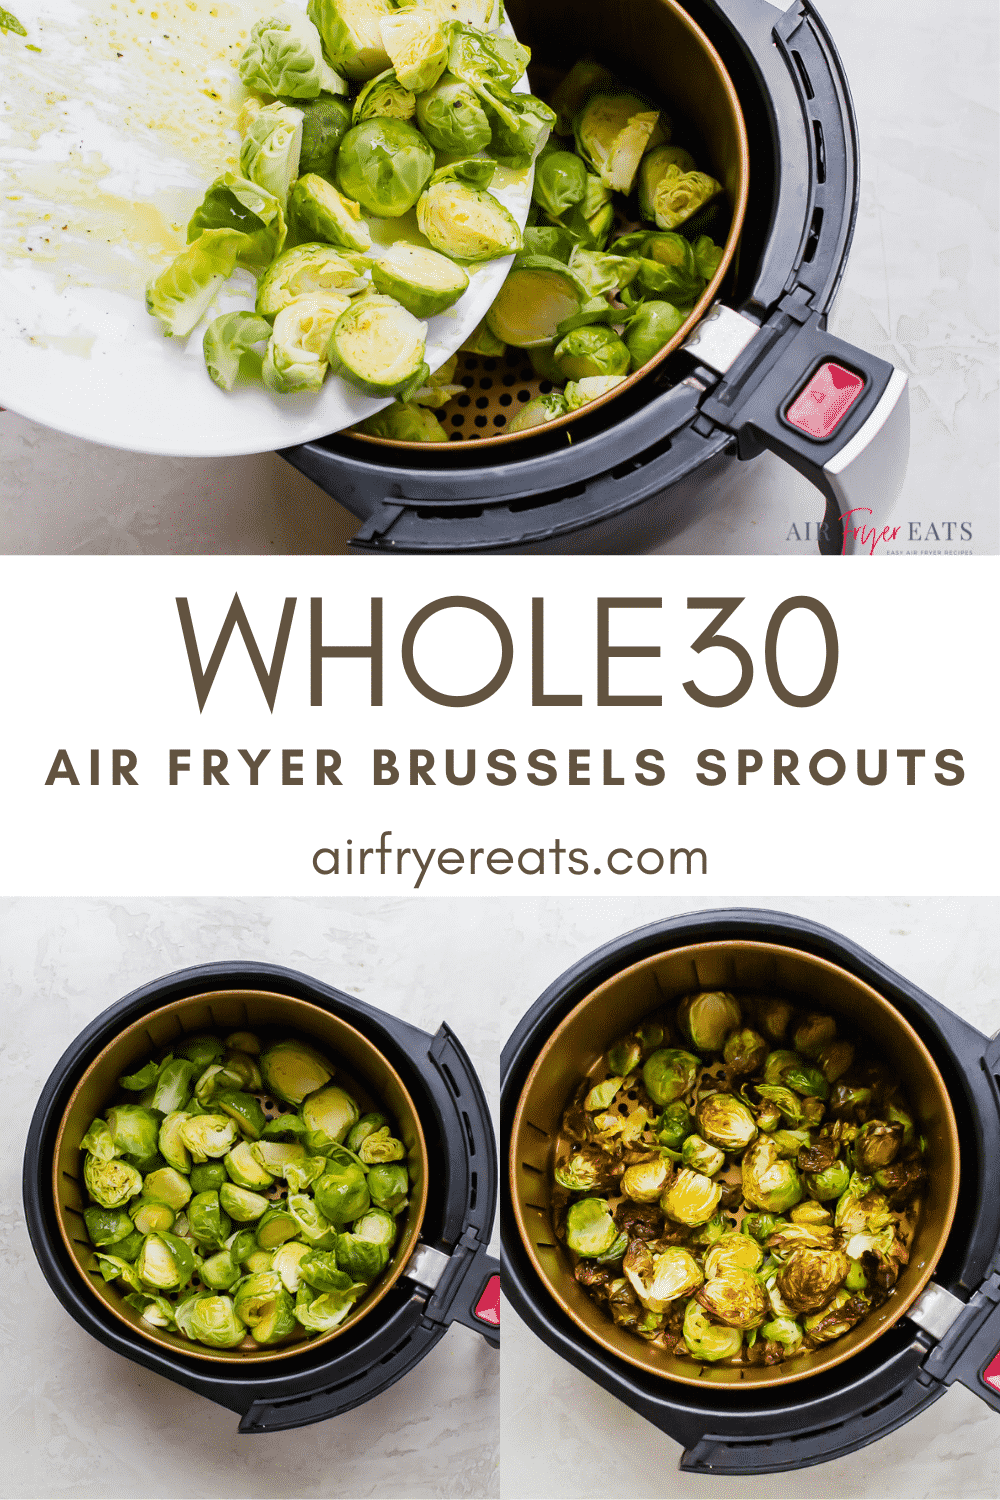 Air Fryer Brussel Sprouts are not only nutritious, but incredibly flavorful! In less than 15 minutes your air fryer gives these sprouts the most delectable crispy crunch on the outside with a roasted, caramelized flavor that is out of this world! #brusselsprouts #sprouts #airfryerbrusselsprouts #airfryersprouts via @vegetarianmamma